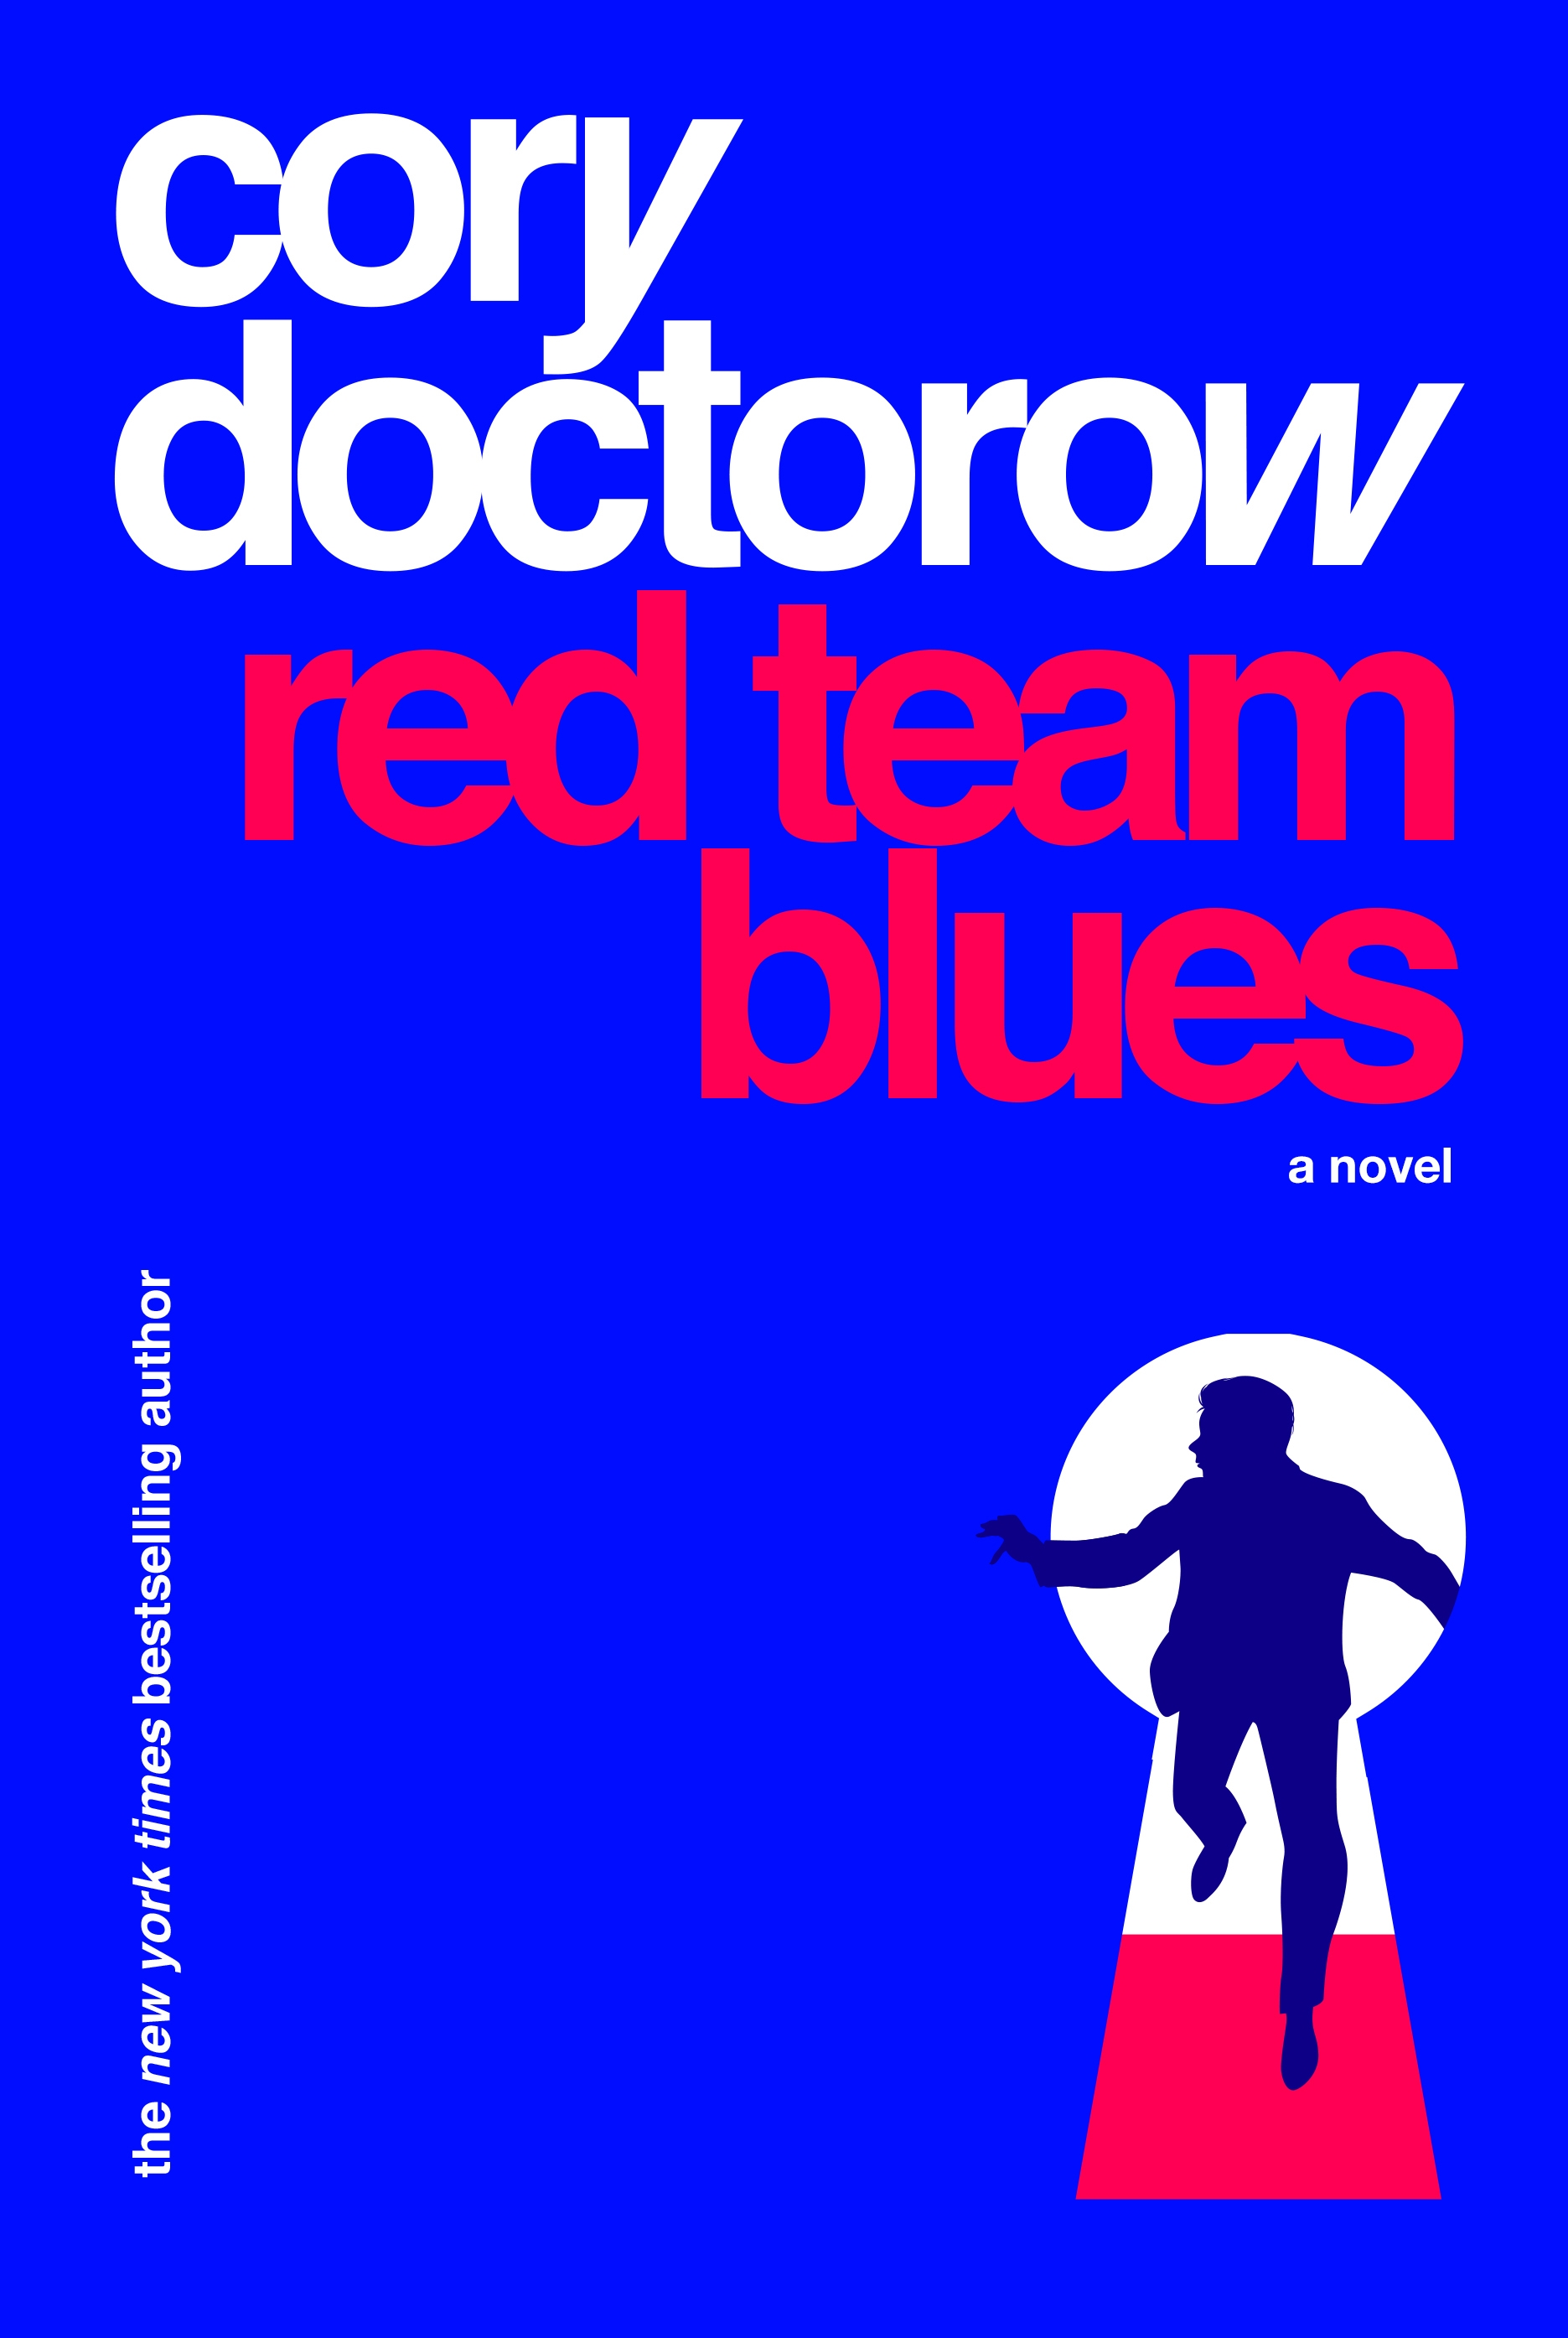 June Book Club: Red Team Blues by Cory Doctorow